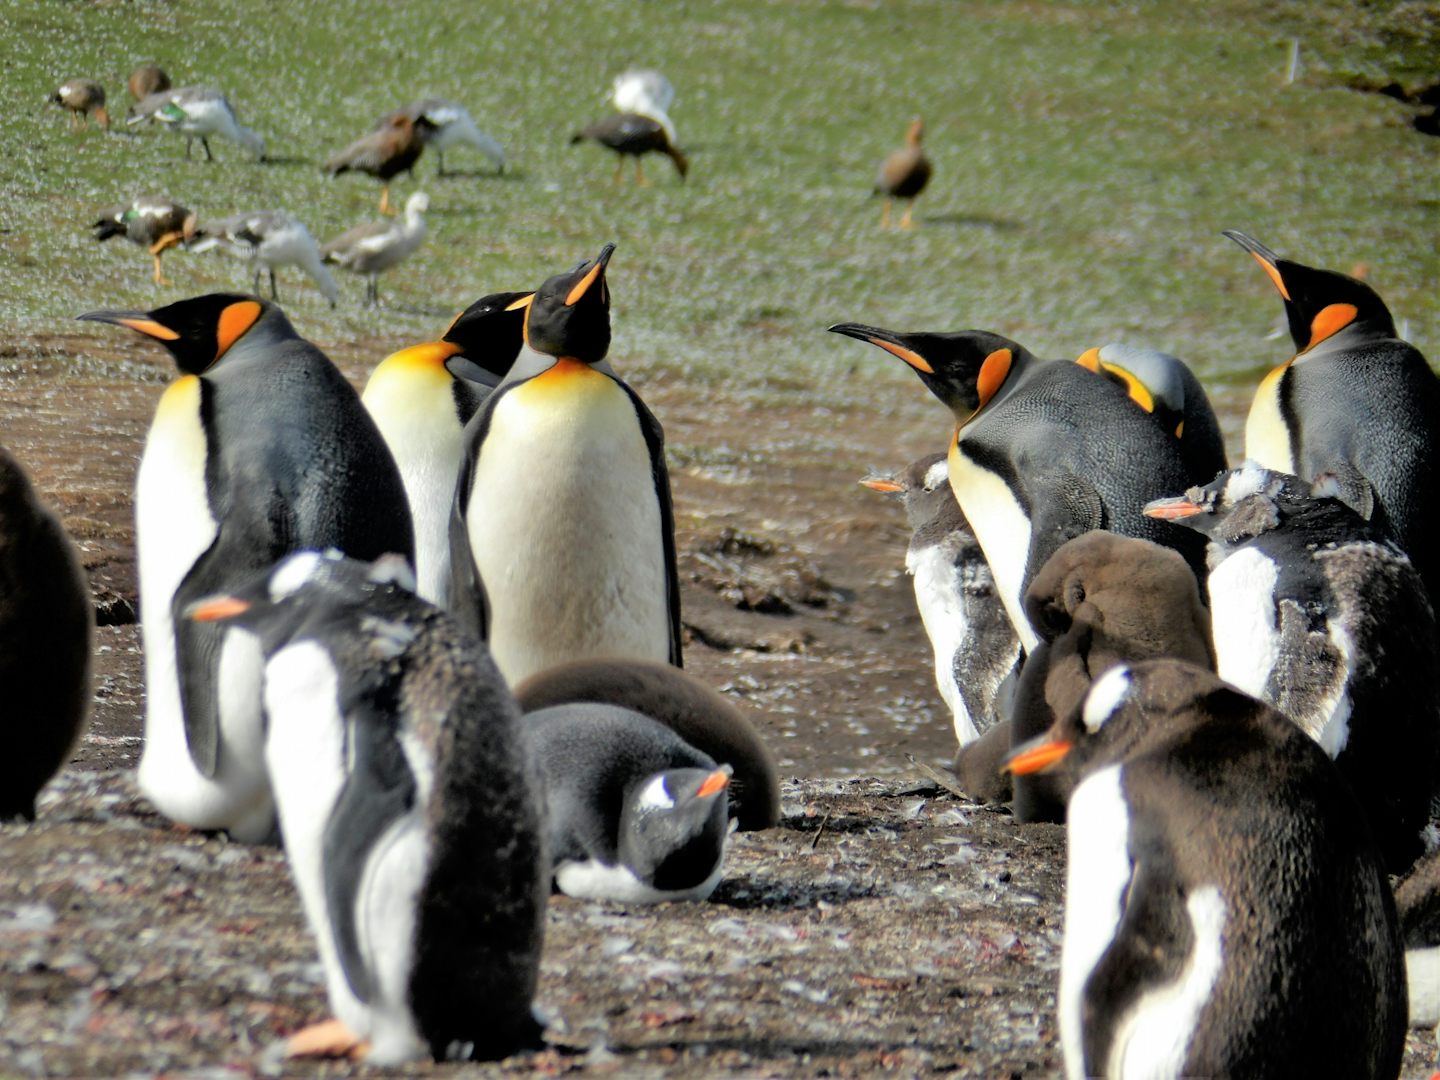 Taken on a tour of the Penguin colony in the Falkland Island. Lots of Adults, and babies just hanging around on a great sunny day.